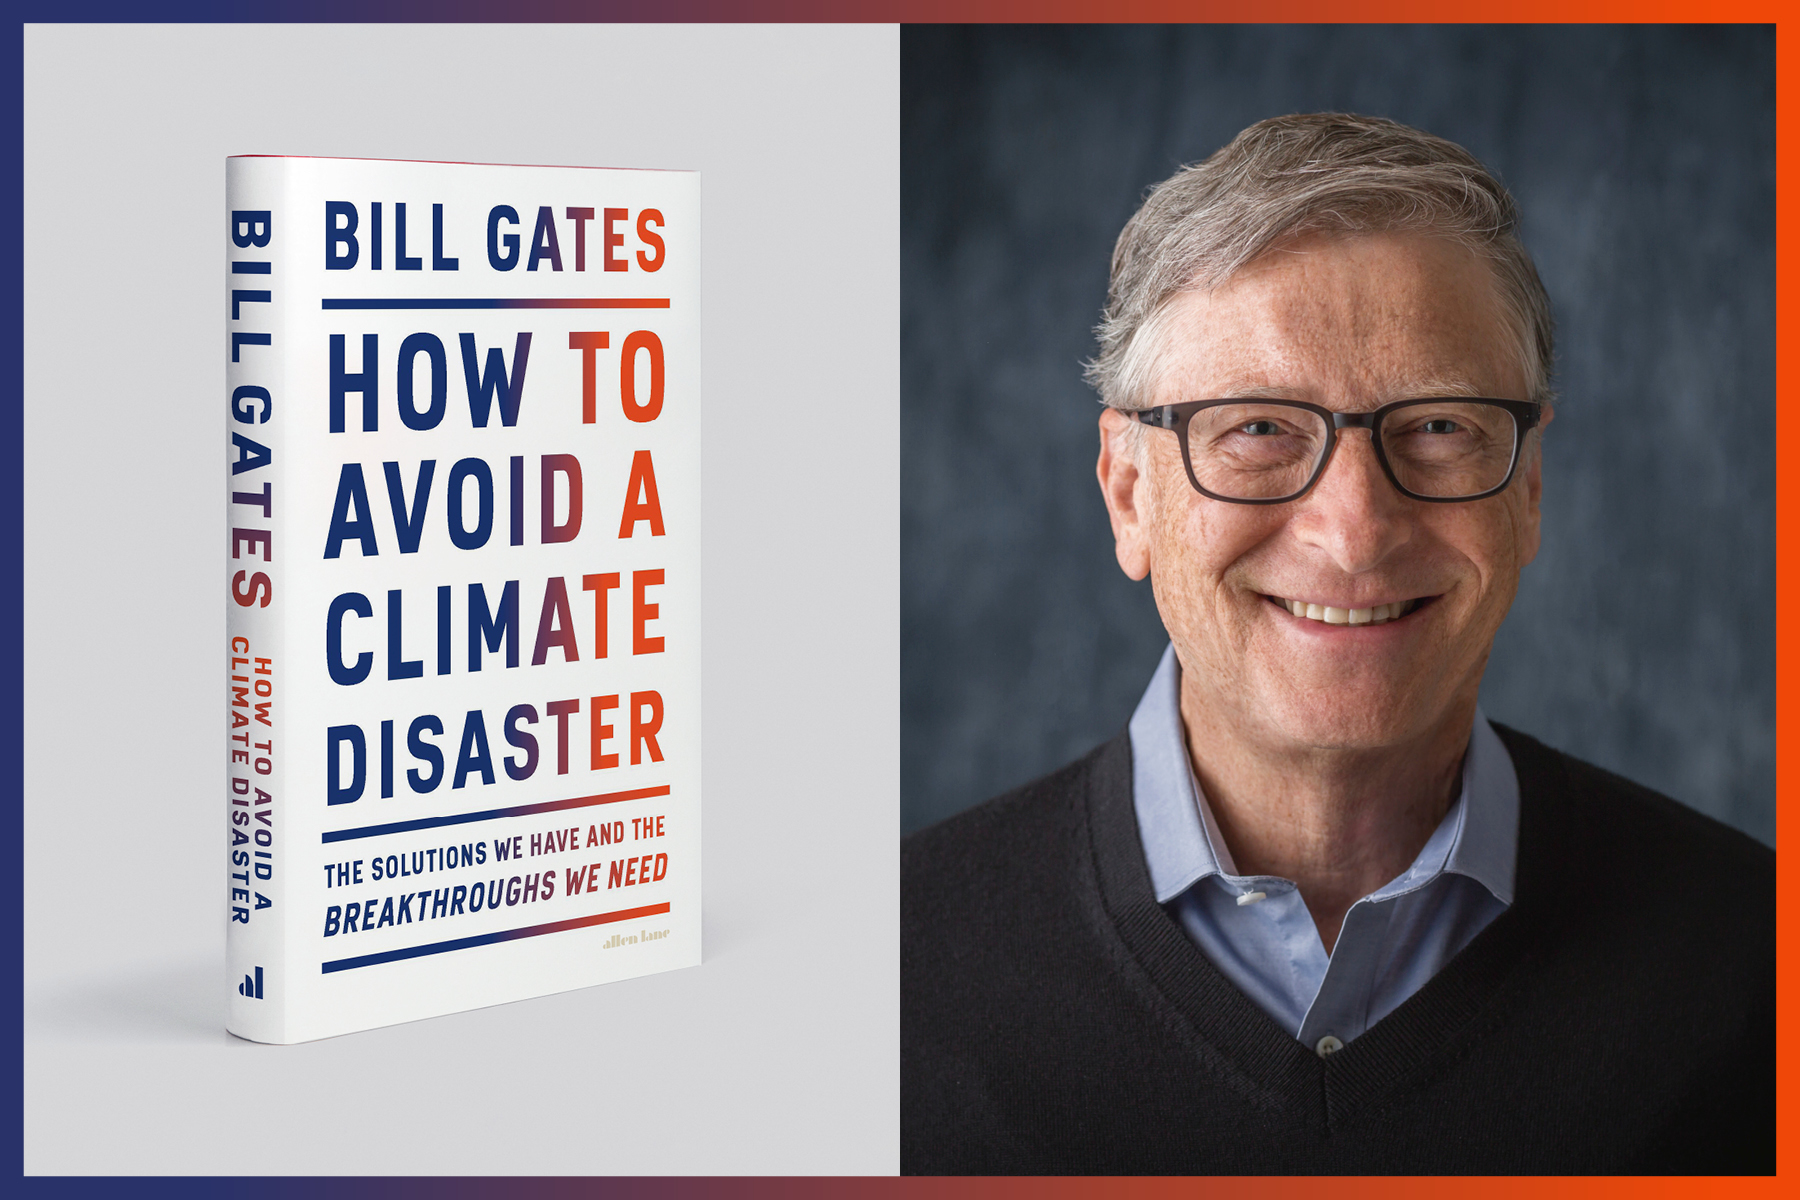 Image of Bill Gates alongside the cover of his new book